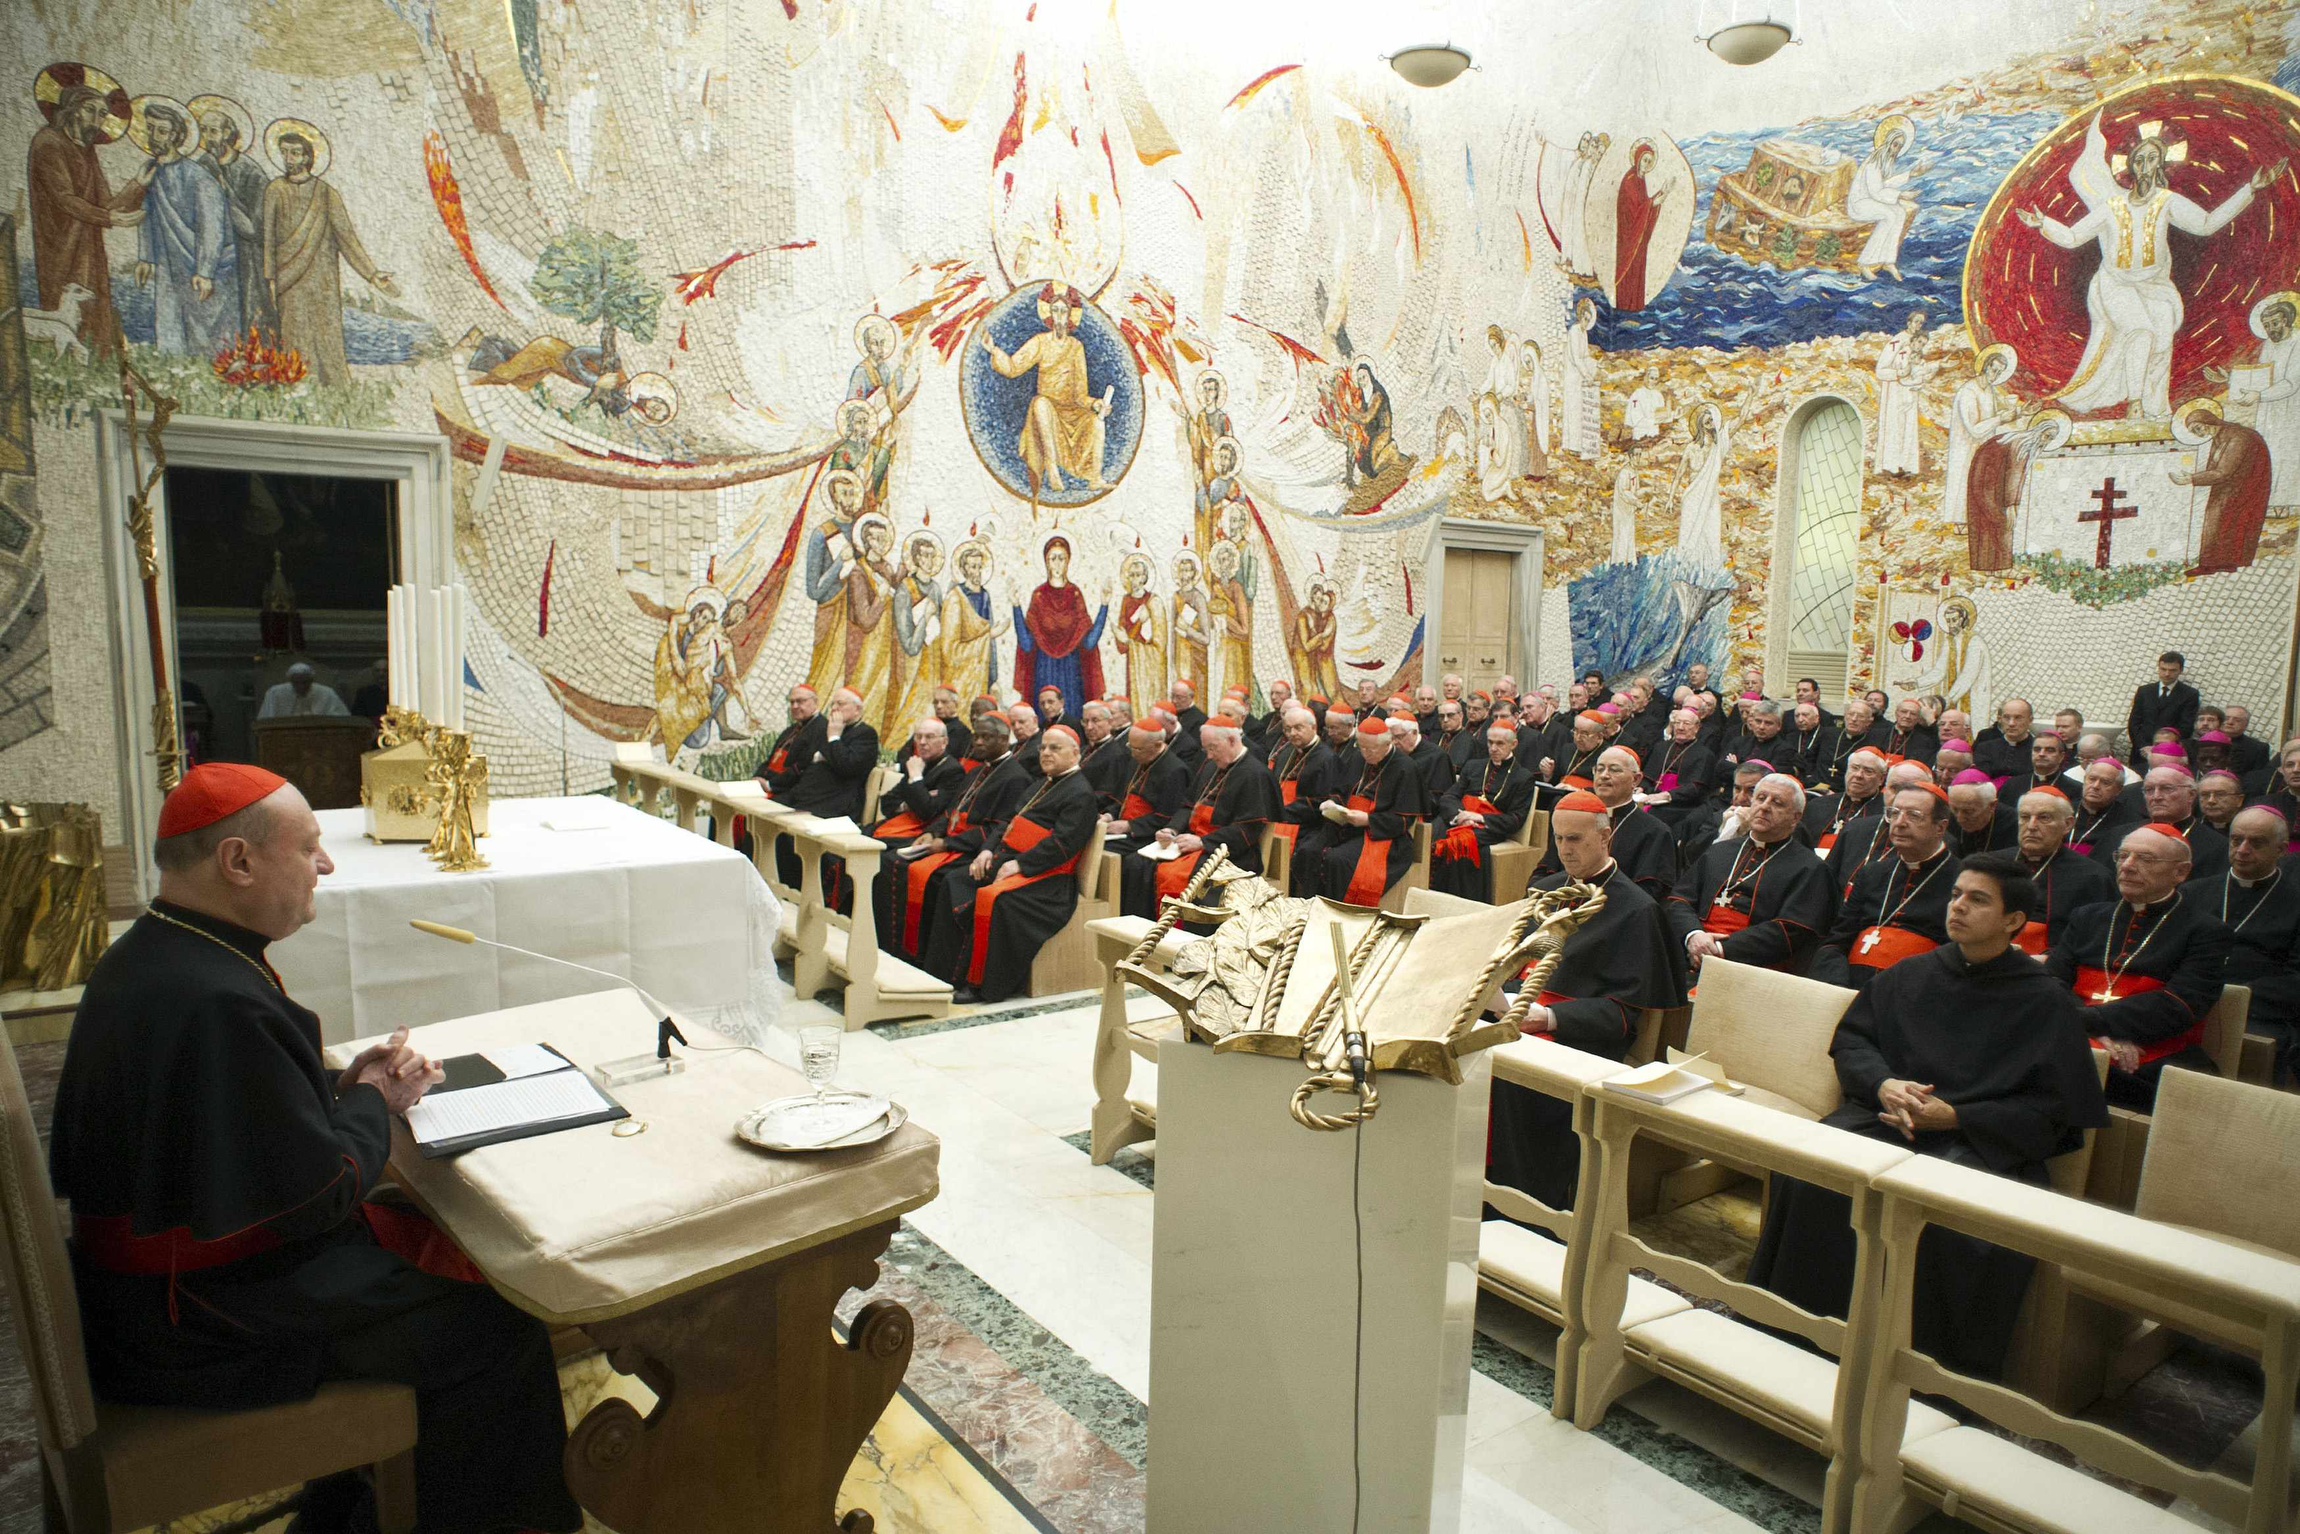 Cardinal Gianfranco Ravasi, president of the Pontifical Council for Culture, addresses members of the Roman Curia during the closing day of a spiritual retreat with Pope Benedict XVI at the Vatican Feb. 23. (CNS photo/L'Osservatore Romano via Reuters)